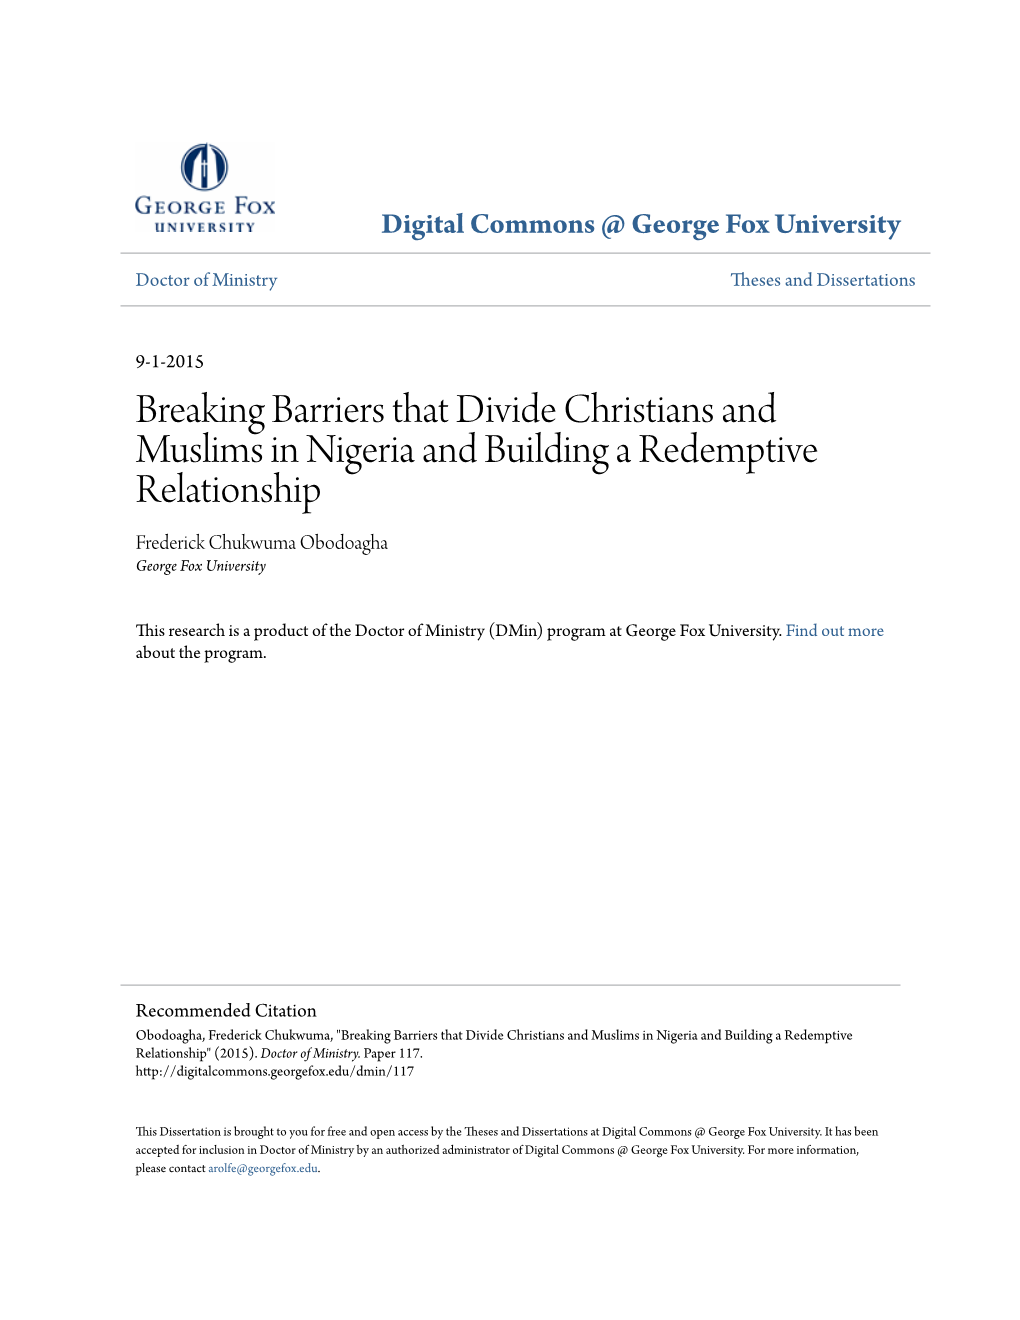 Breaking Barriers That Divide Christians and Muslims in Nigeria and Building a Redemptive Relationship Frederick Chukwuma Obodoagha George Fox University